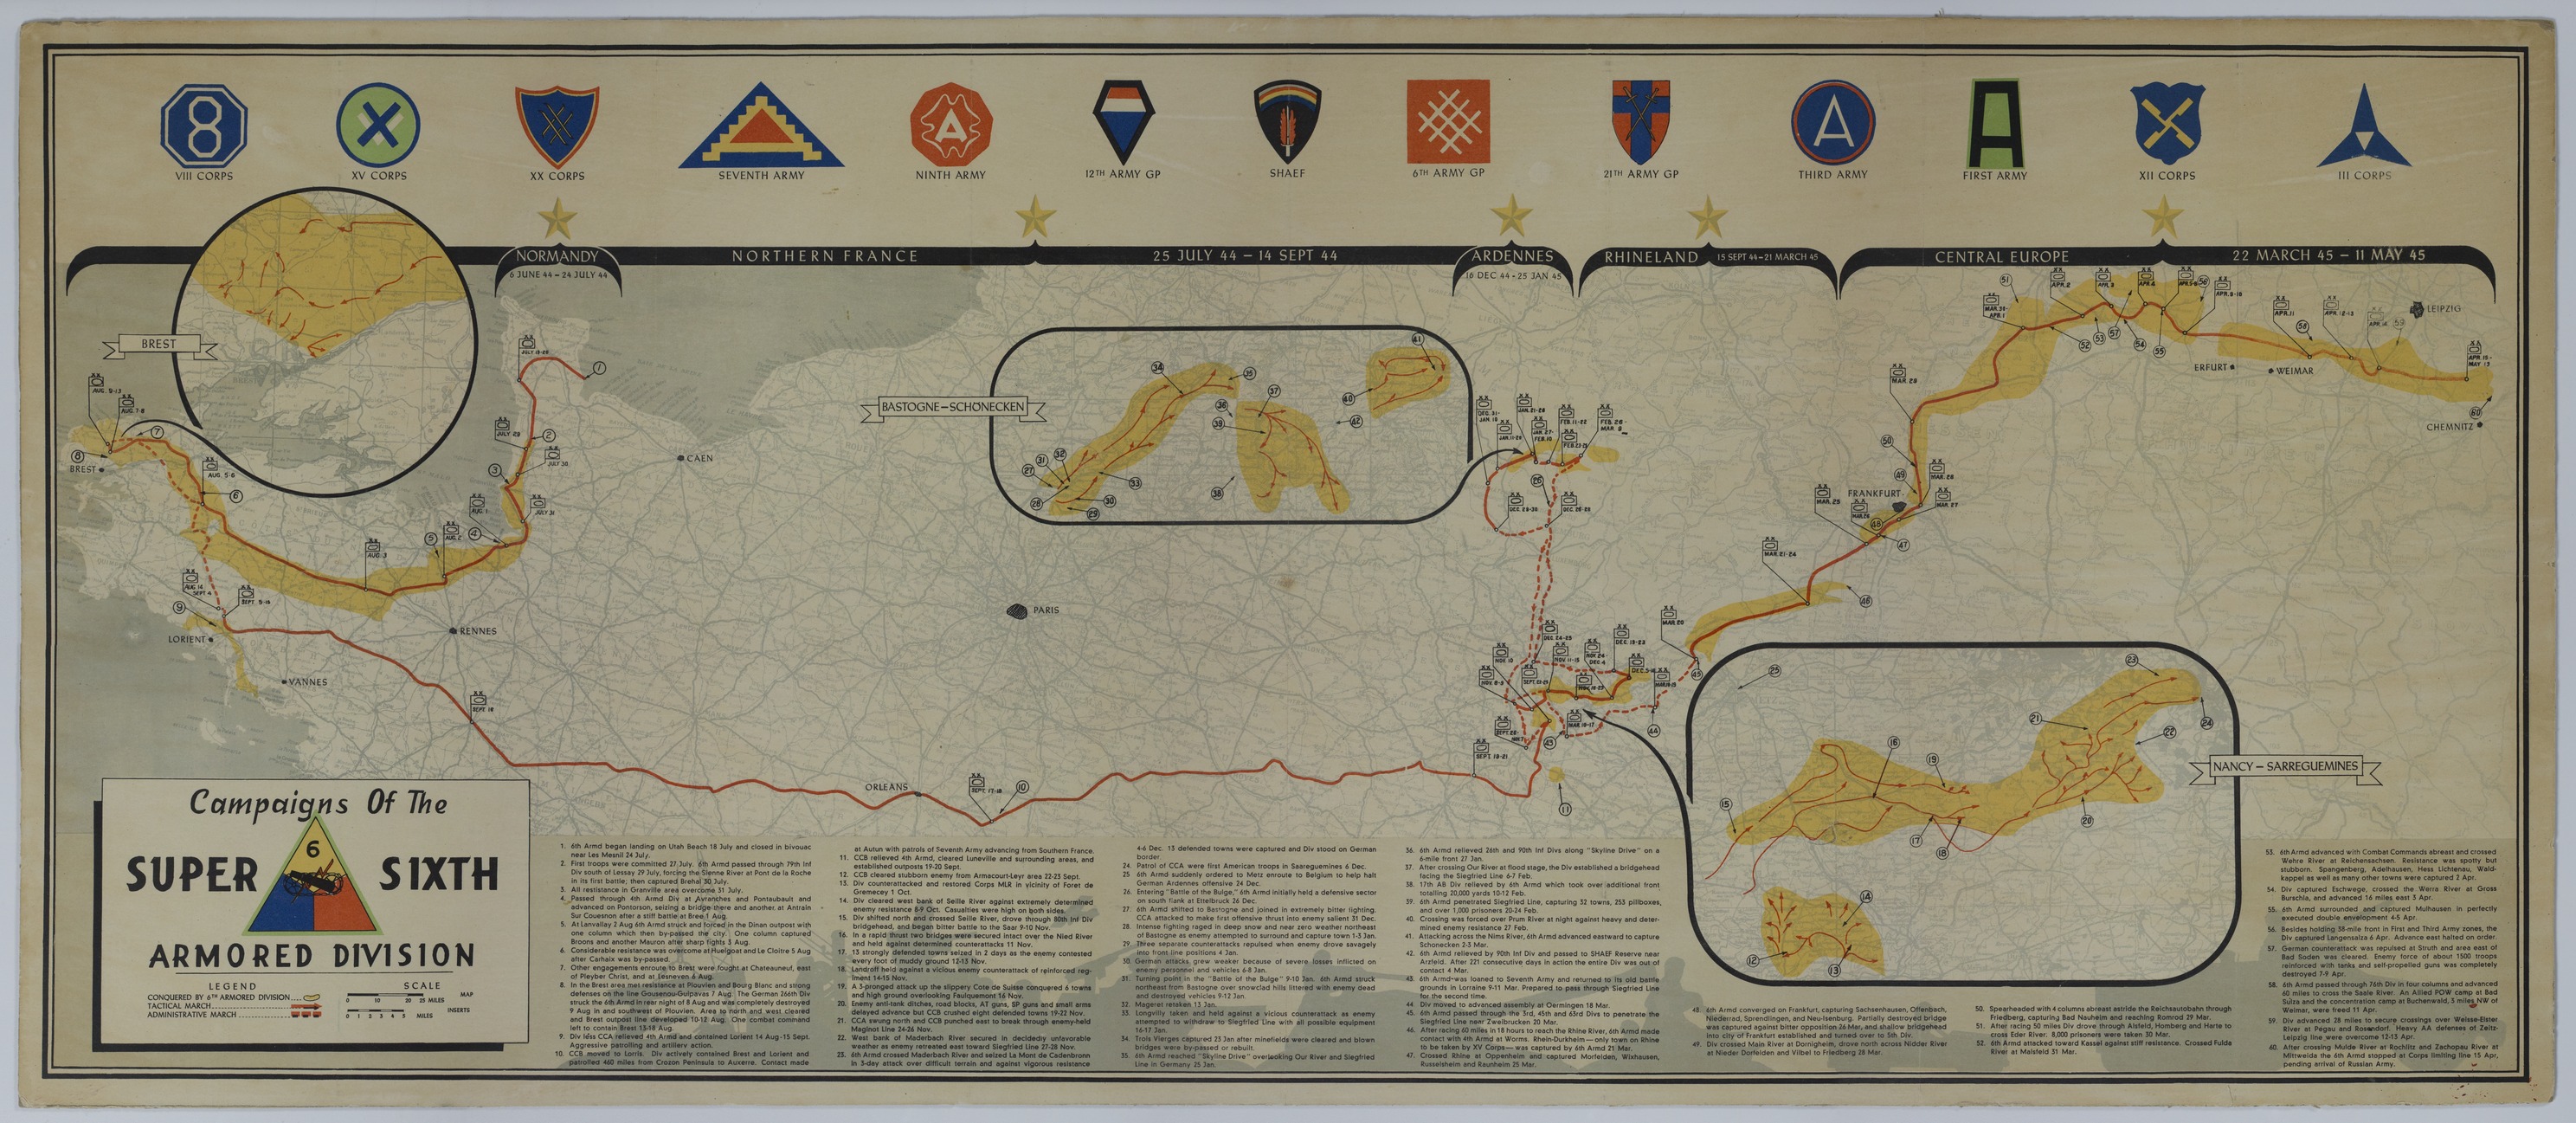 Map of the Super Sixth Armored Division